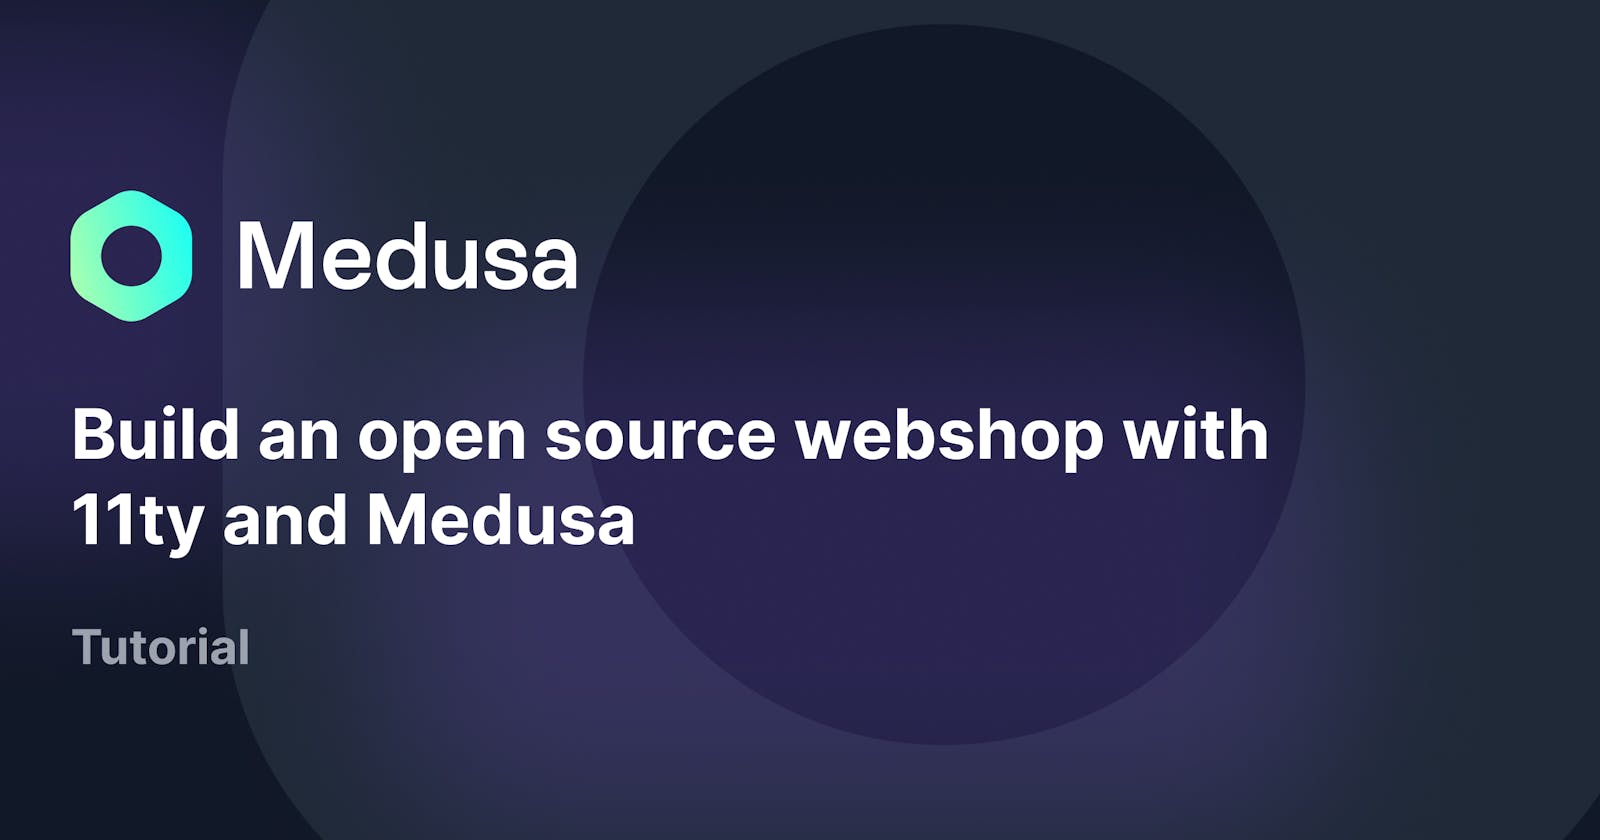 Build an open source webshop with 11ty and Medusa